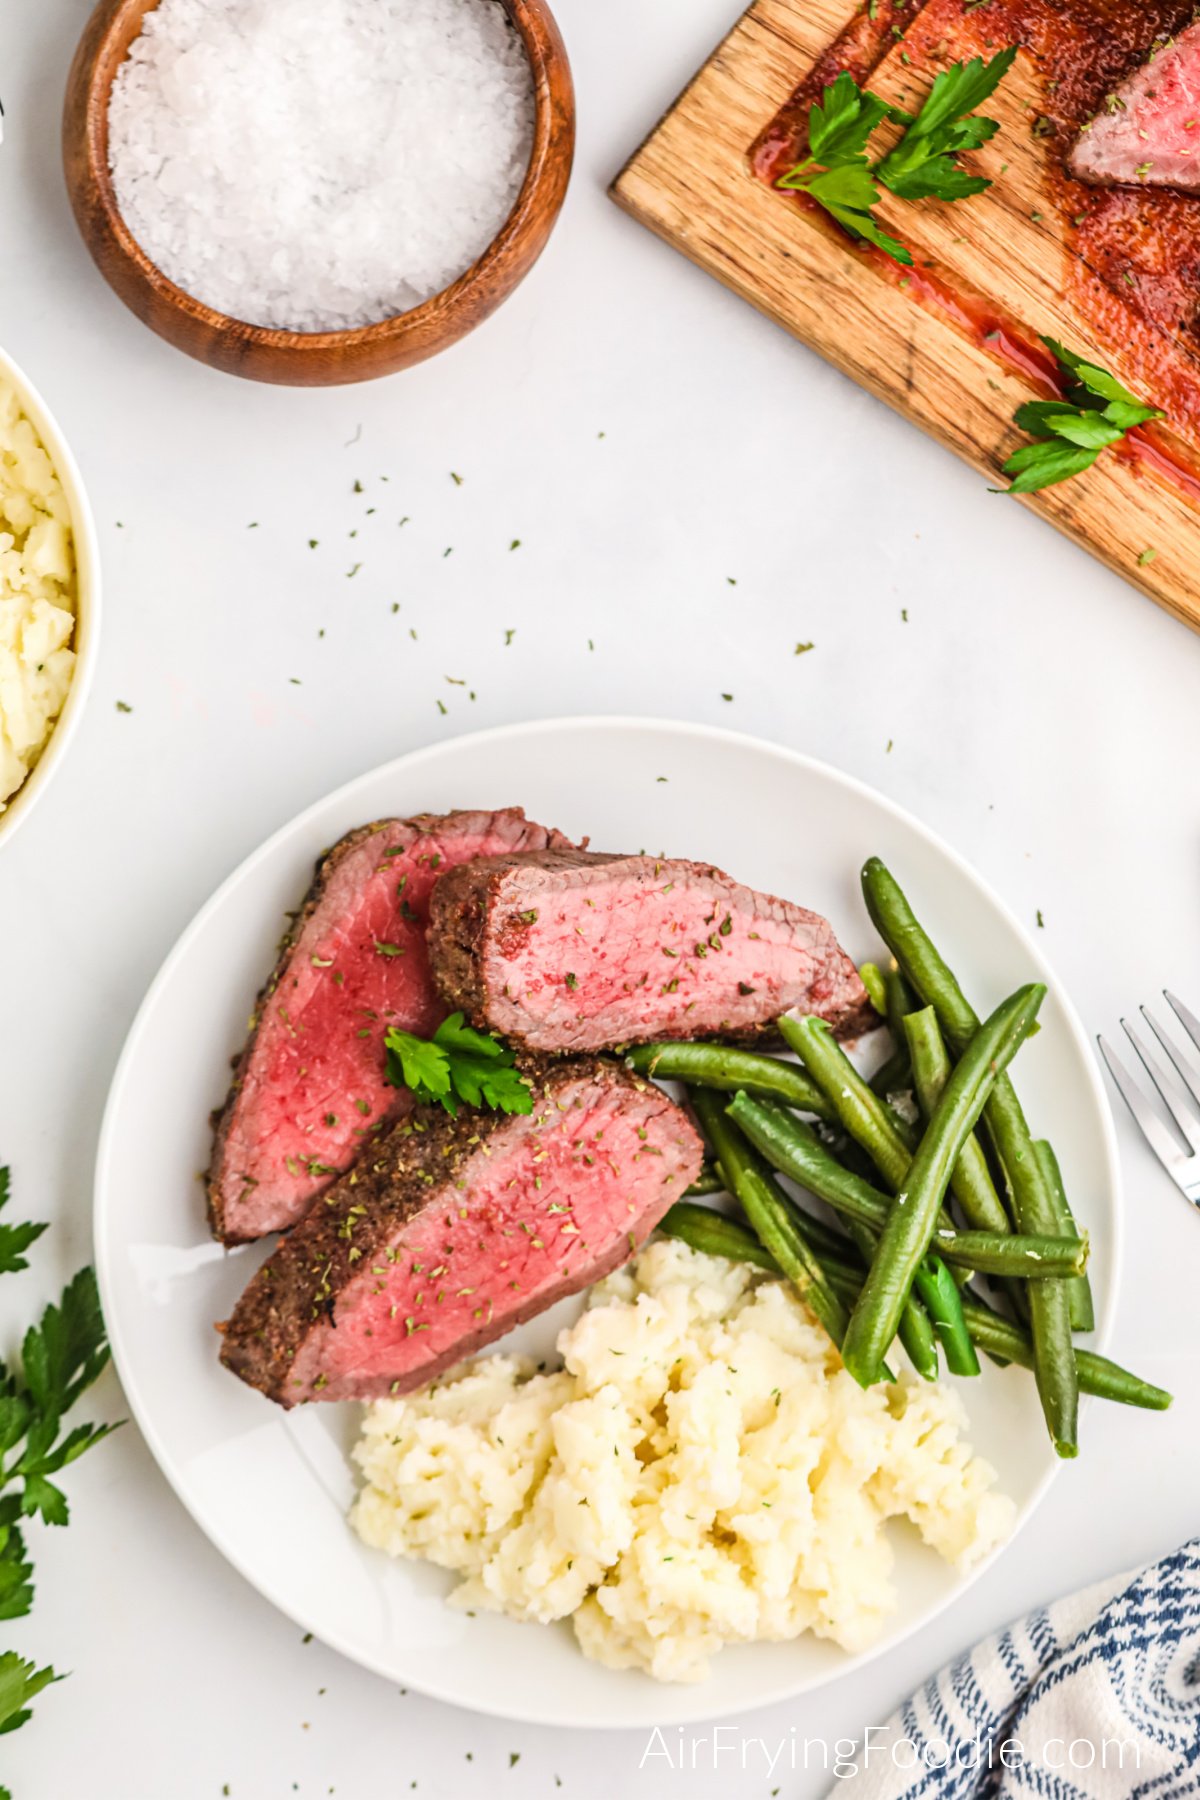 Seasoned London Broil made in the air fryer, served on a white plate with green beans and mashed potatoes.